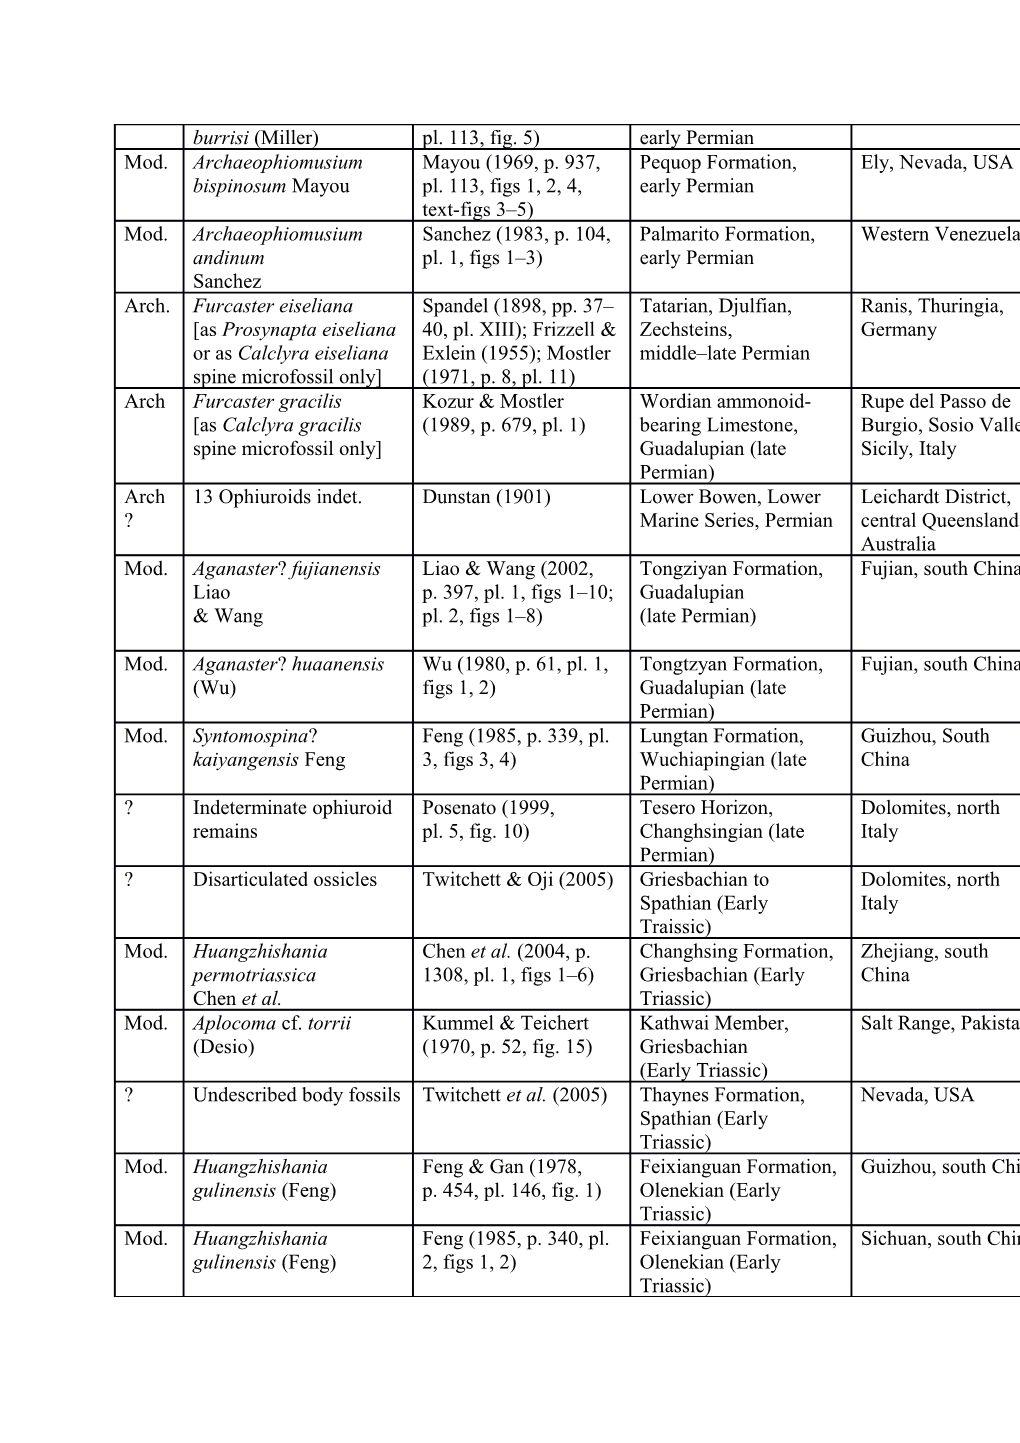 Supplemental Table 1. Table of All Known Published Carboniferous, Permian and Triassic